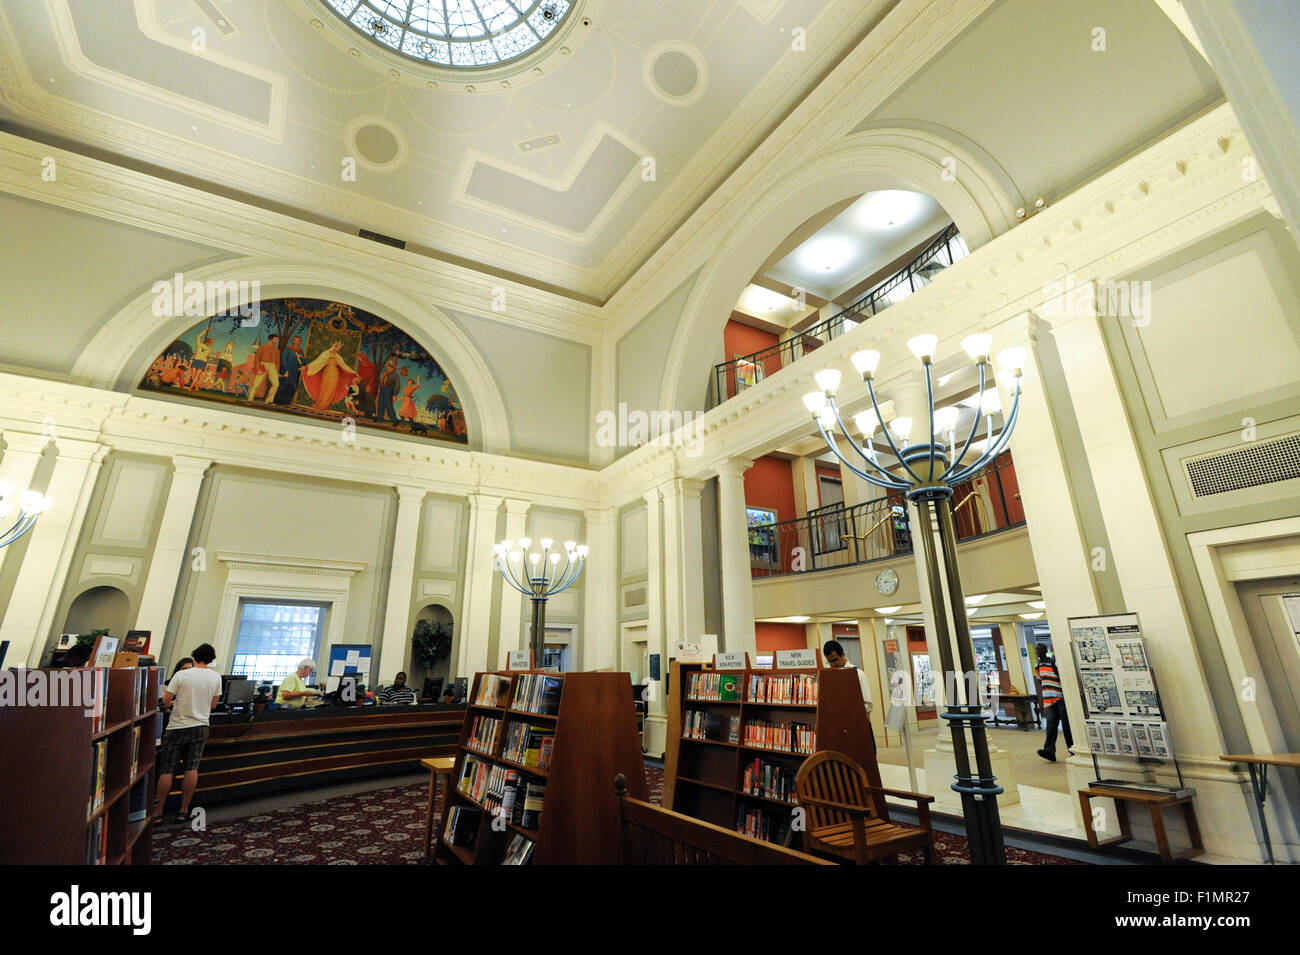 New Haven Free Public Library, New Haven, Connecticut. Lunette mural designed and painted by Bancel La Farge. Stock Photo